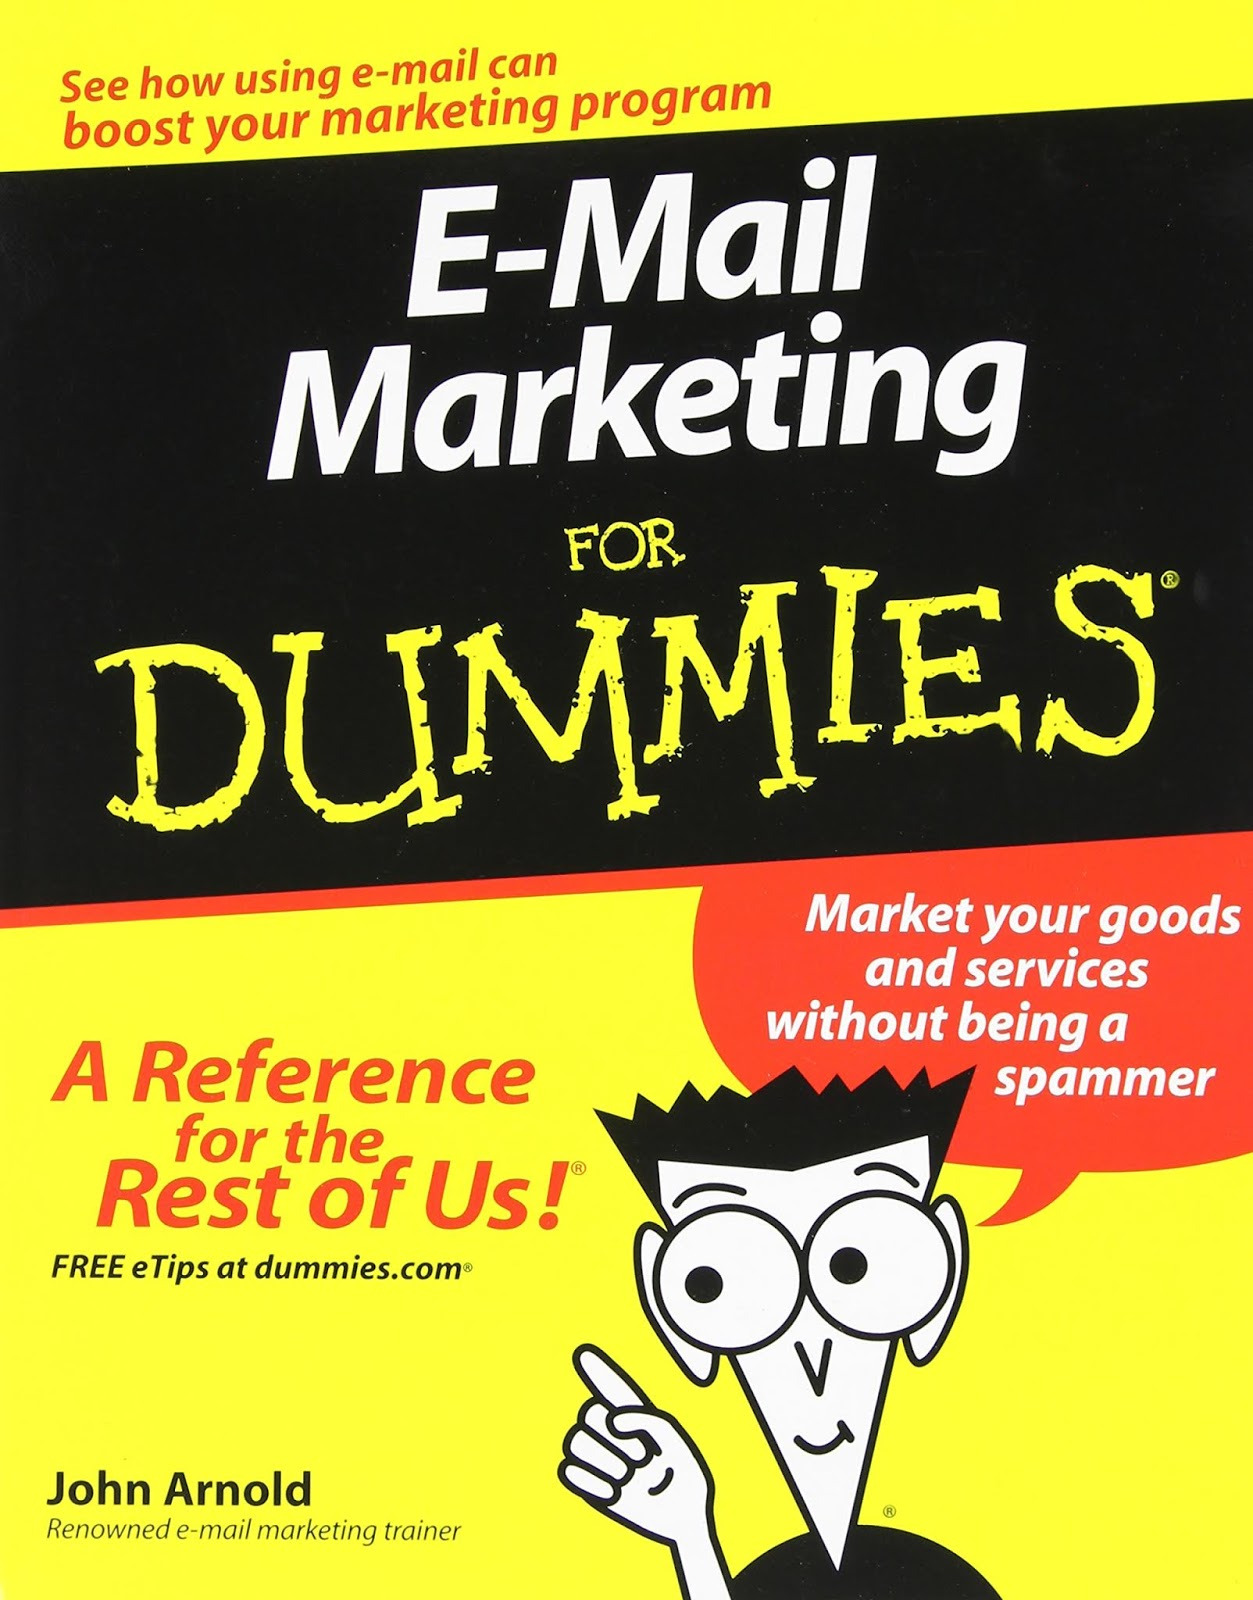 Email Marketing For Dummies by John Arnold